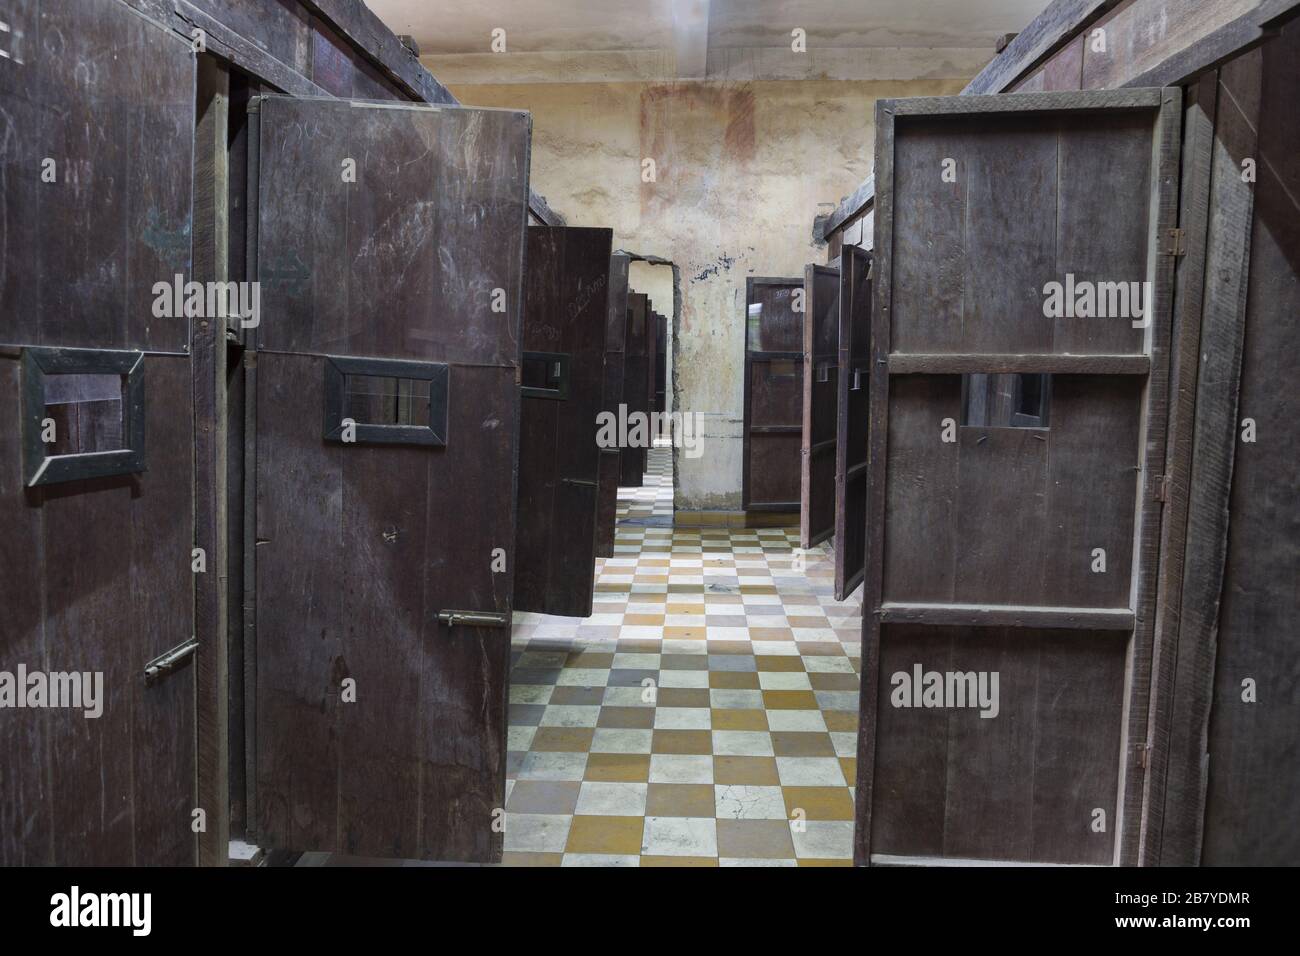 Prison Cells in Tuol Sleng War Crimes Genocide Museum inside former school used by Khmer Rouge regime as Security Prison in Phnom Pehn, Cambodia Stock Photo